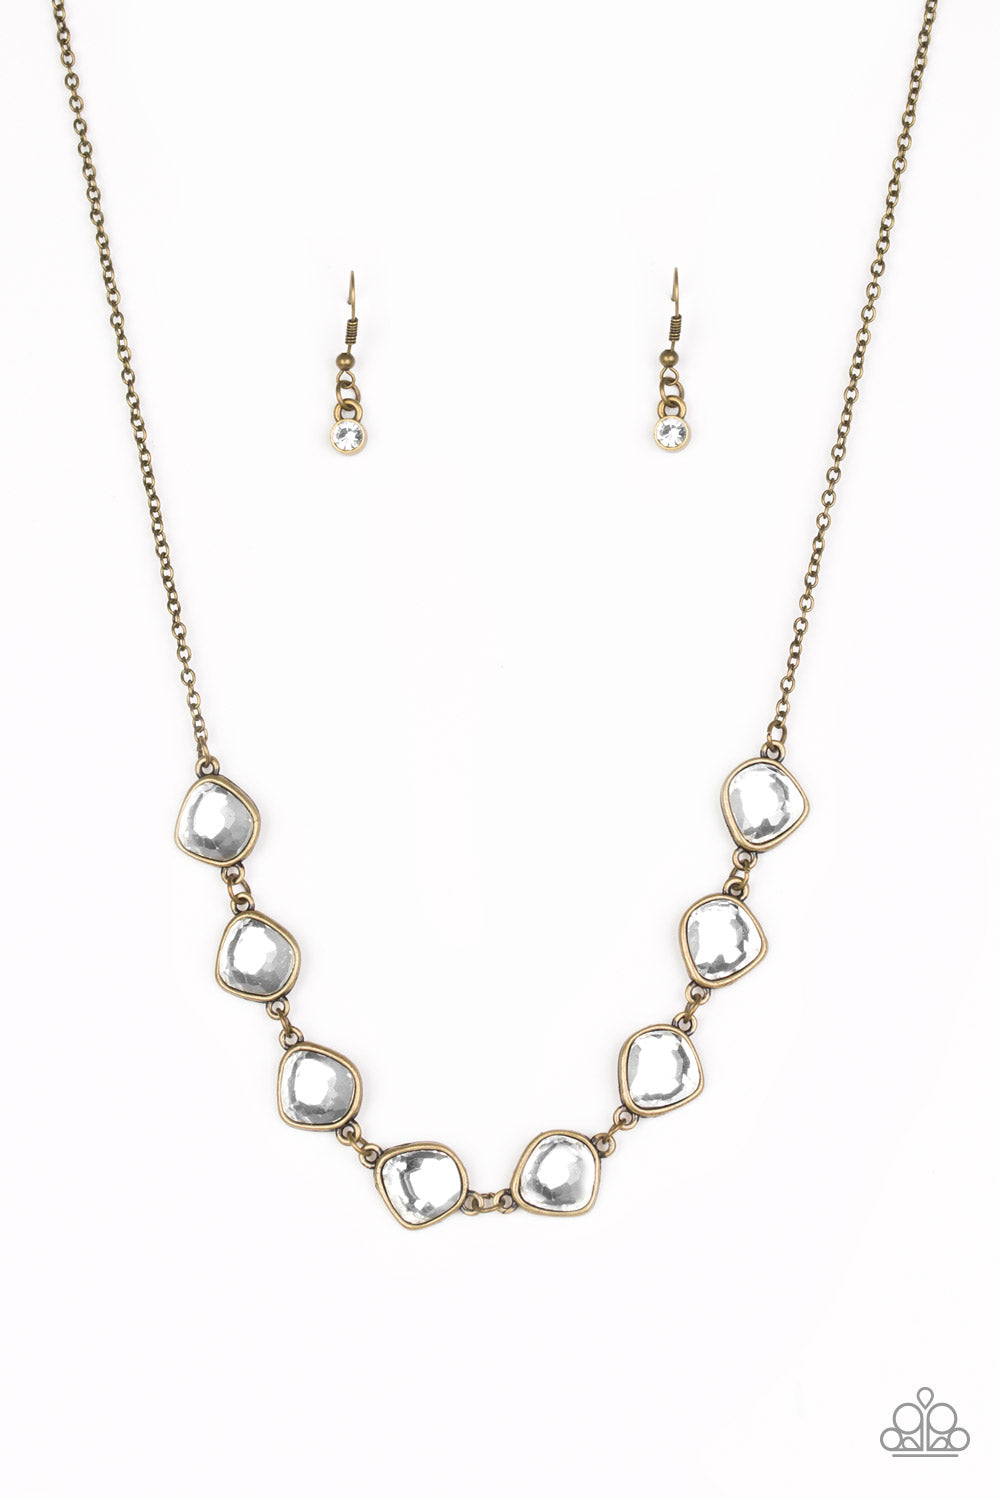 Paparazzi - The Imperfectionist - Brass & White Necklace